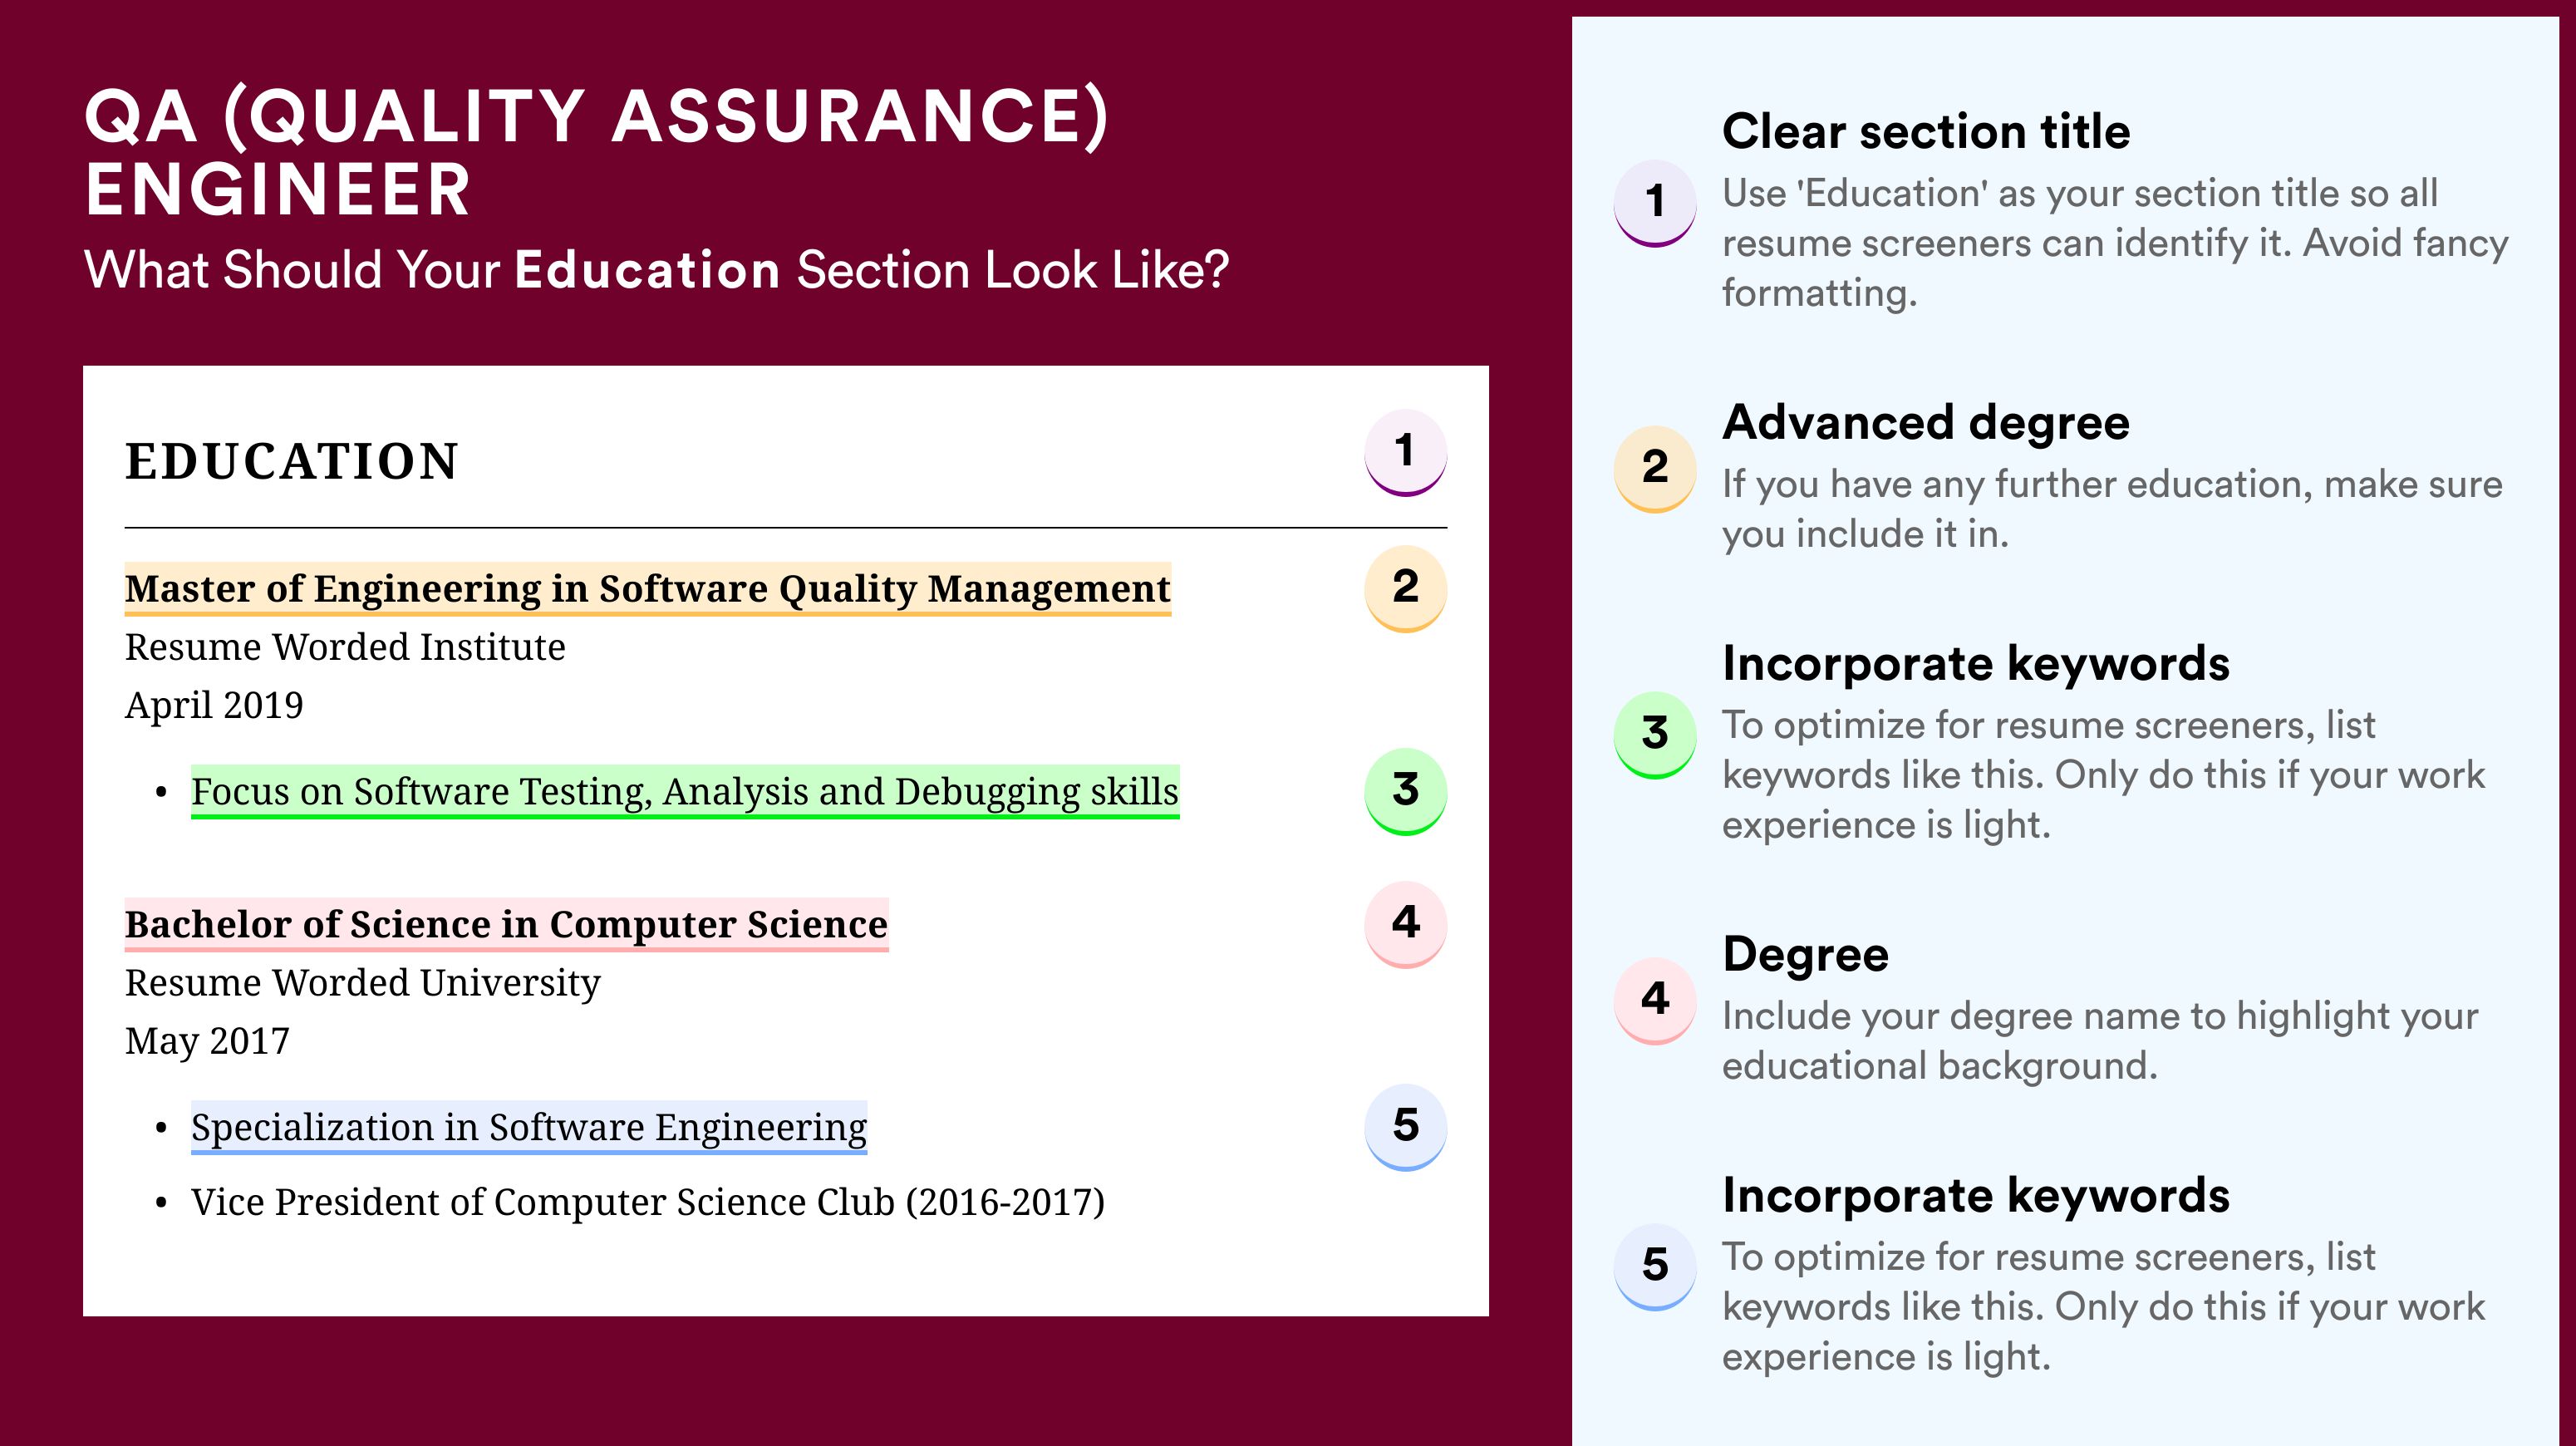 How To Write An Education Section - QA (Quality Assurance) Engineer Roles